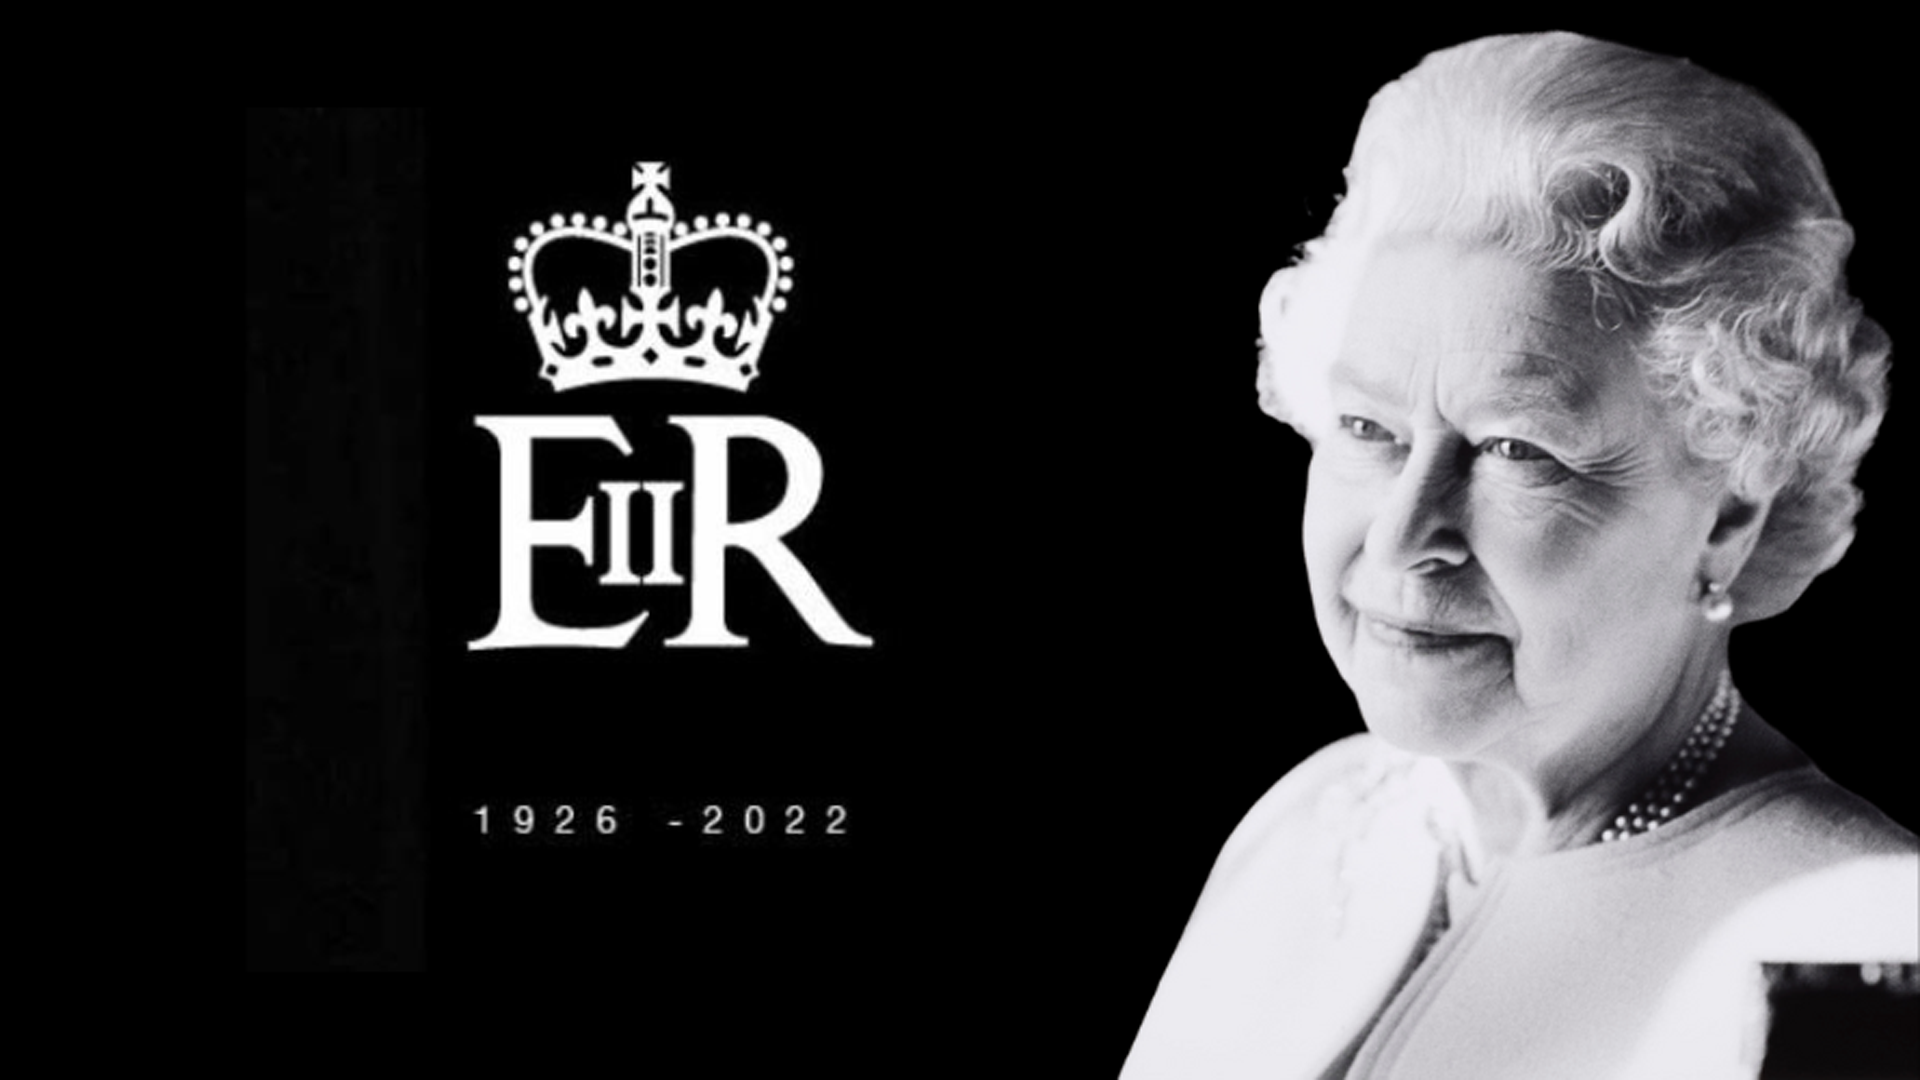 The Death of Her Majesty The Queen – Statement